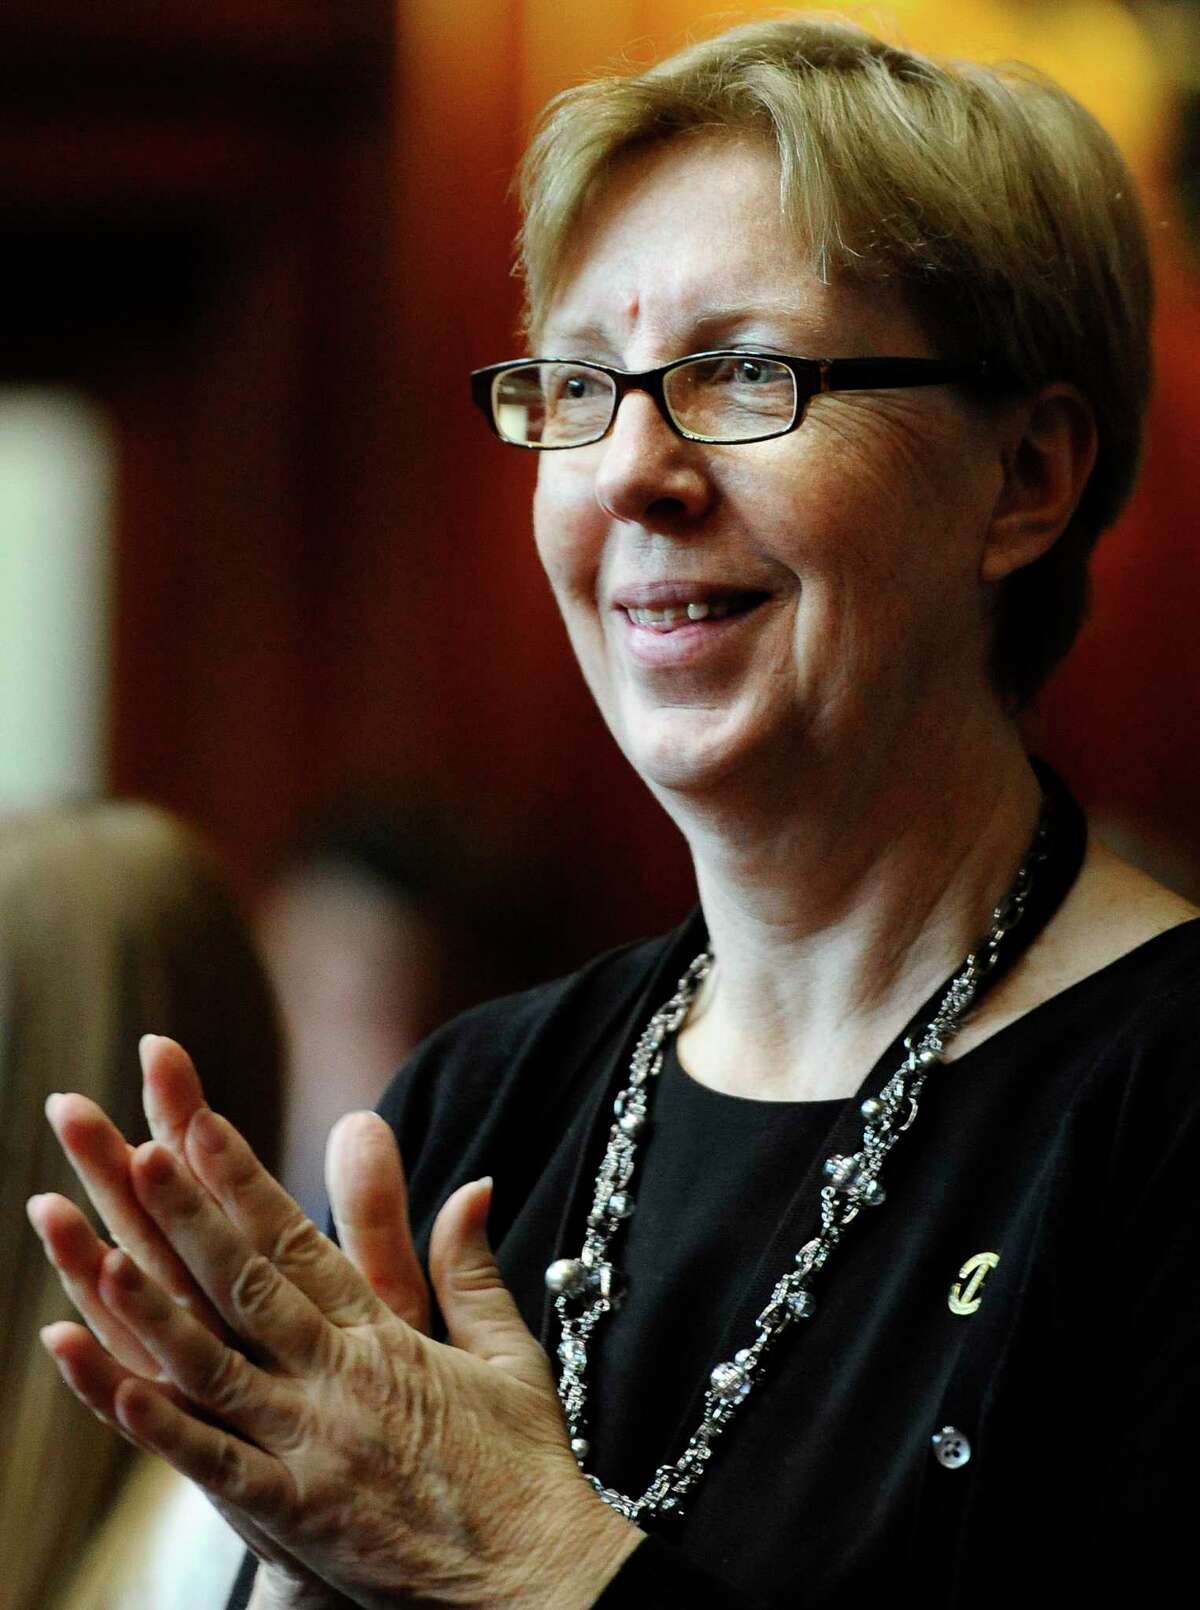 New State Sen. Cathy Osten, D-Sprague, smiles during opening session at the Capitol in Hartford, Conn., Wednesday, Jan. 9, 2013.